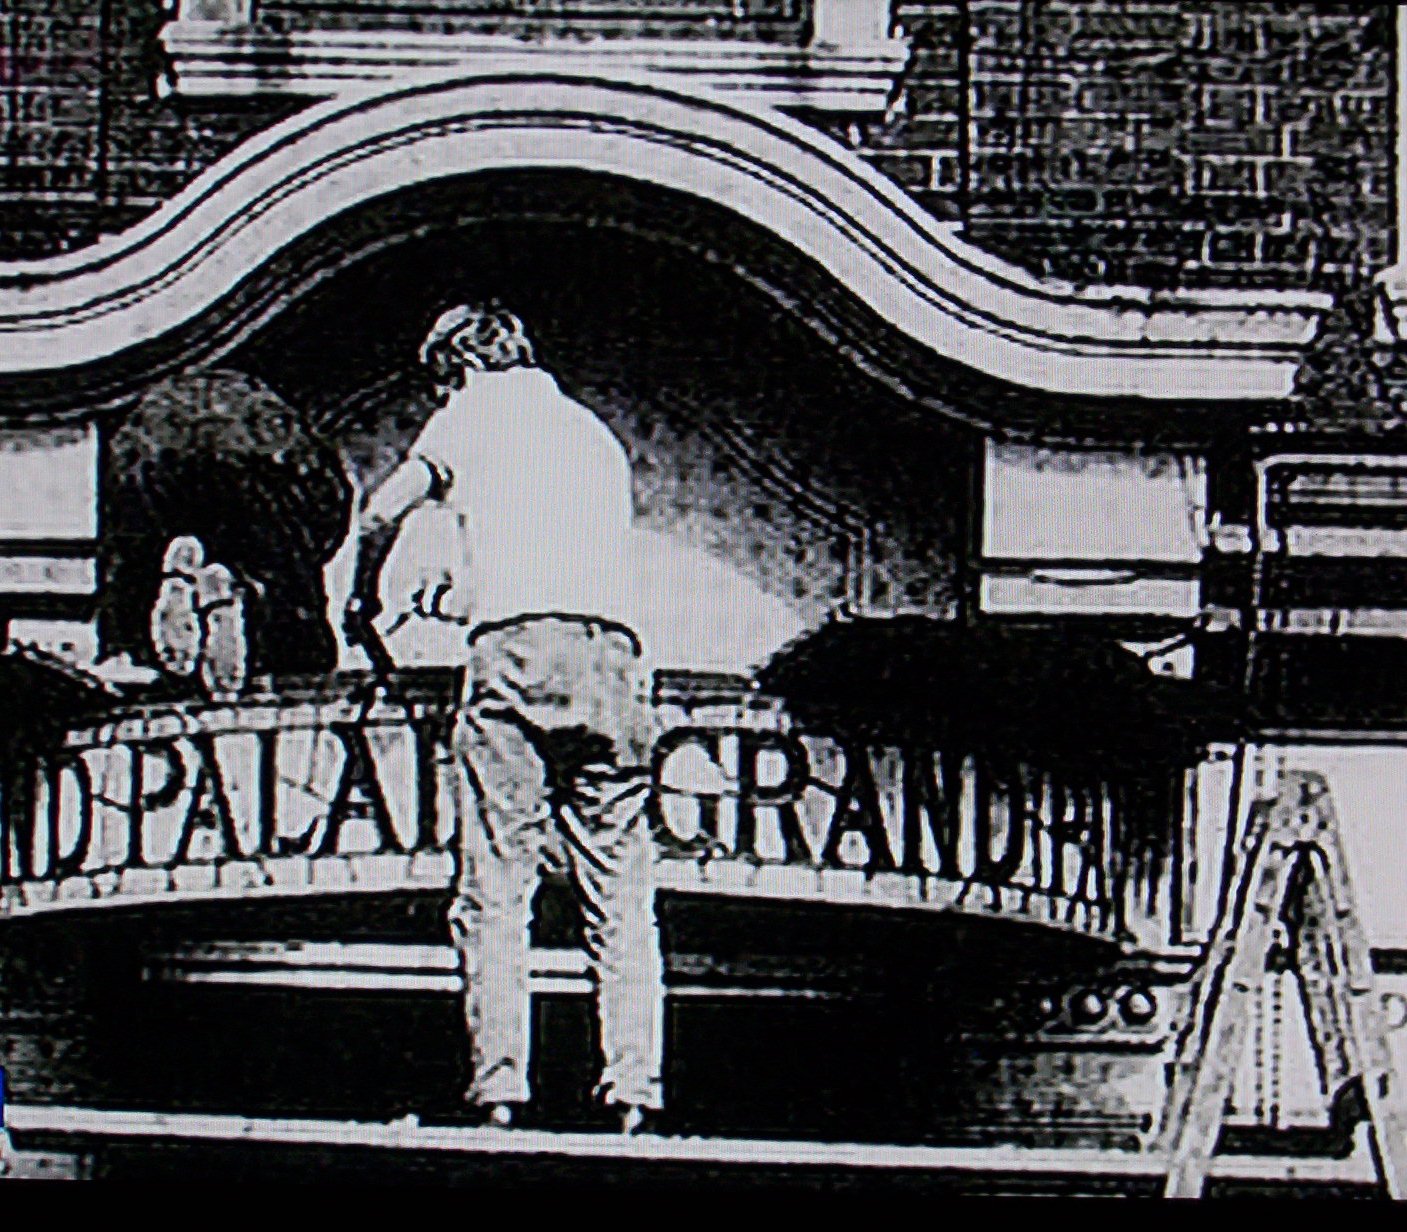 Grand Palais Yiddish theatre in Commercial Rd